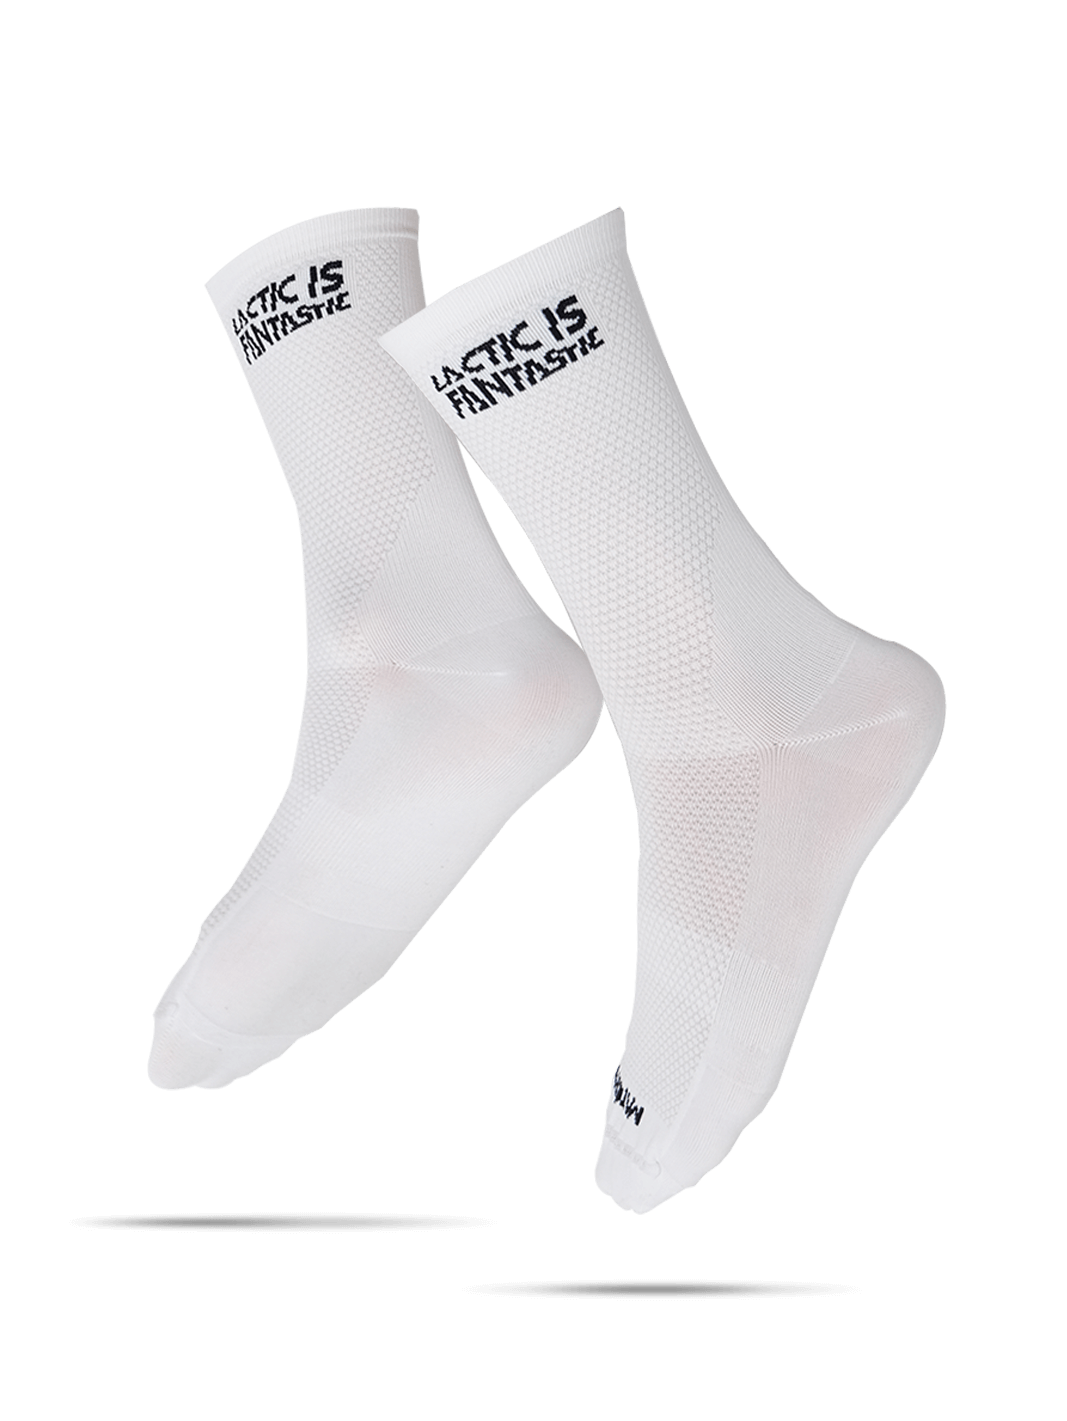 Chaussettes Blanches - Lactic is Fantastic